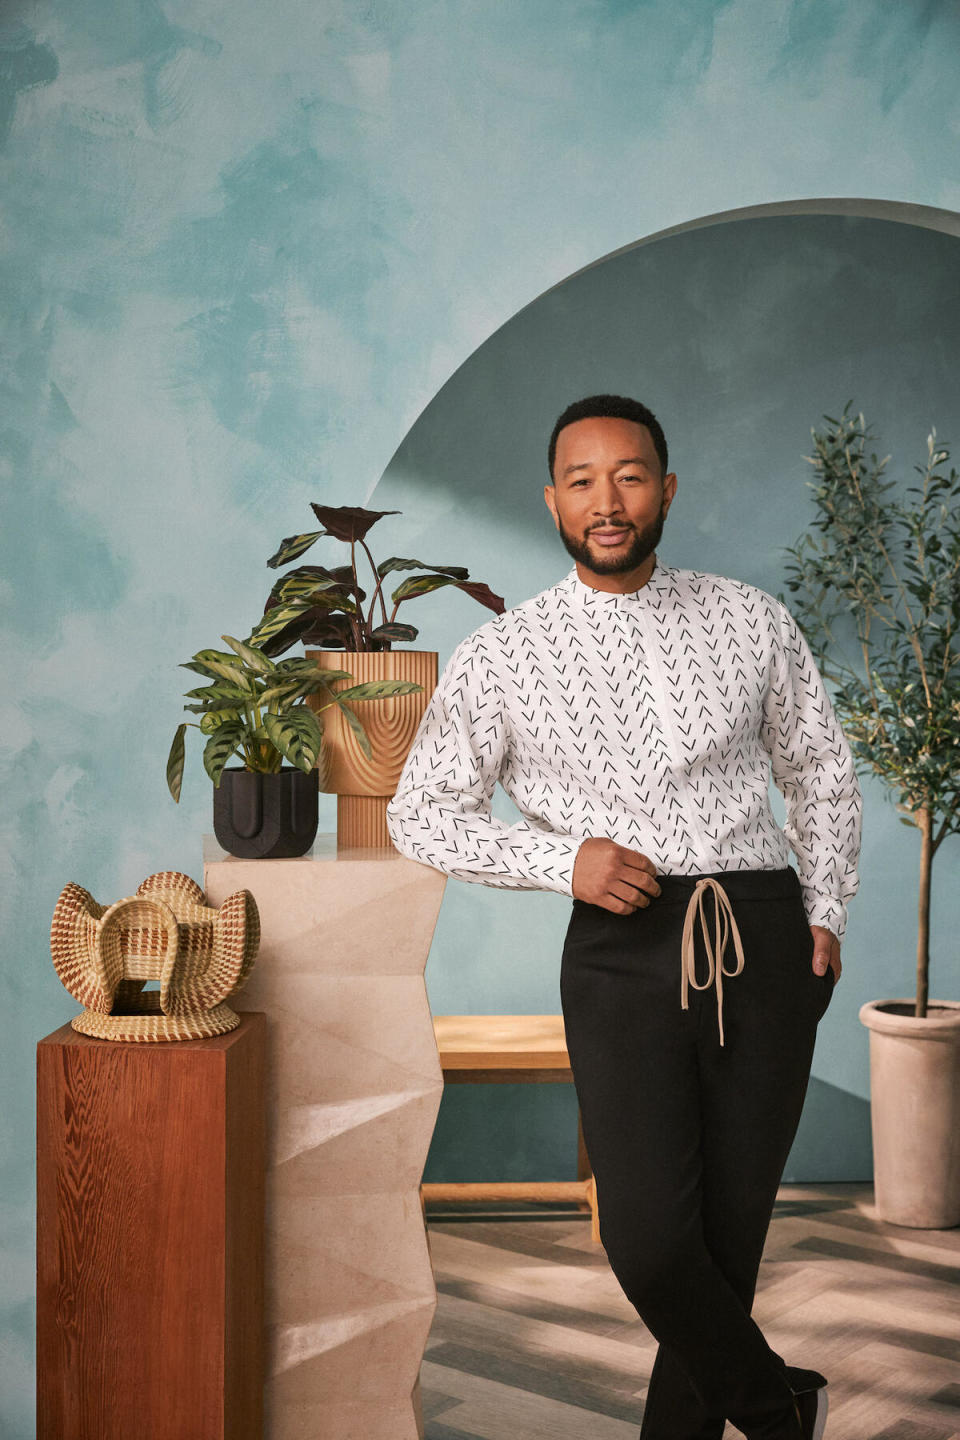 Etsy tapped John Legend for a collection highlighting underrepresented makers on the platform